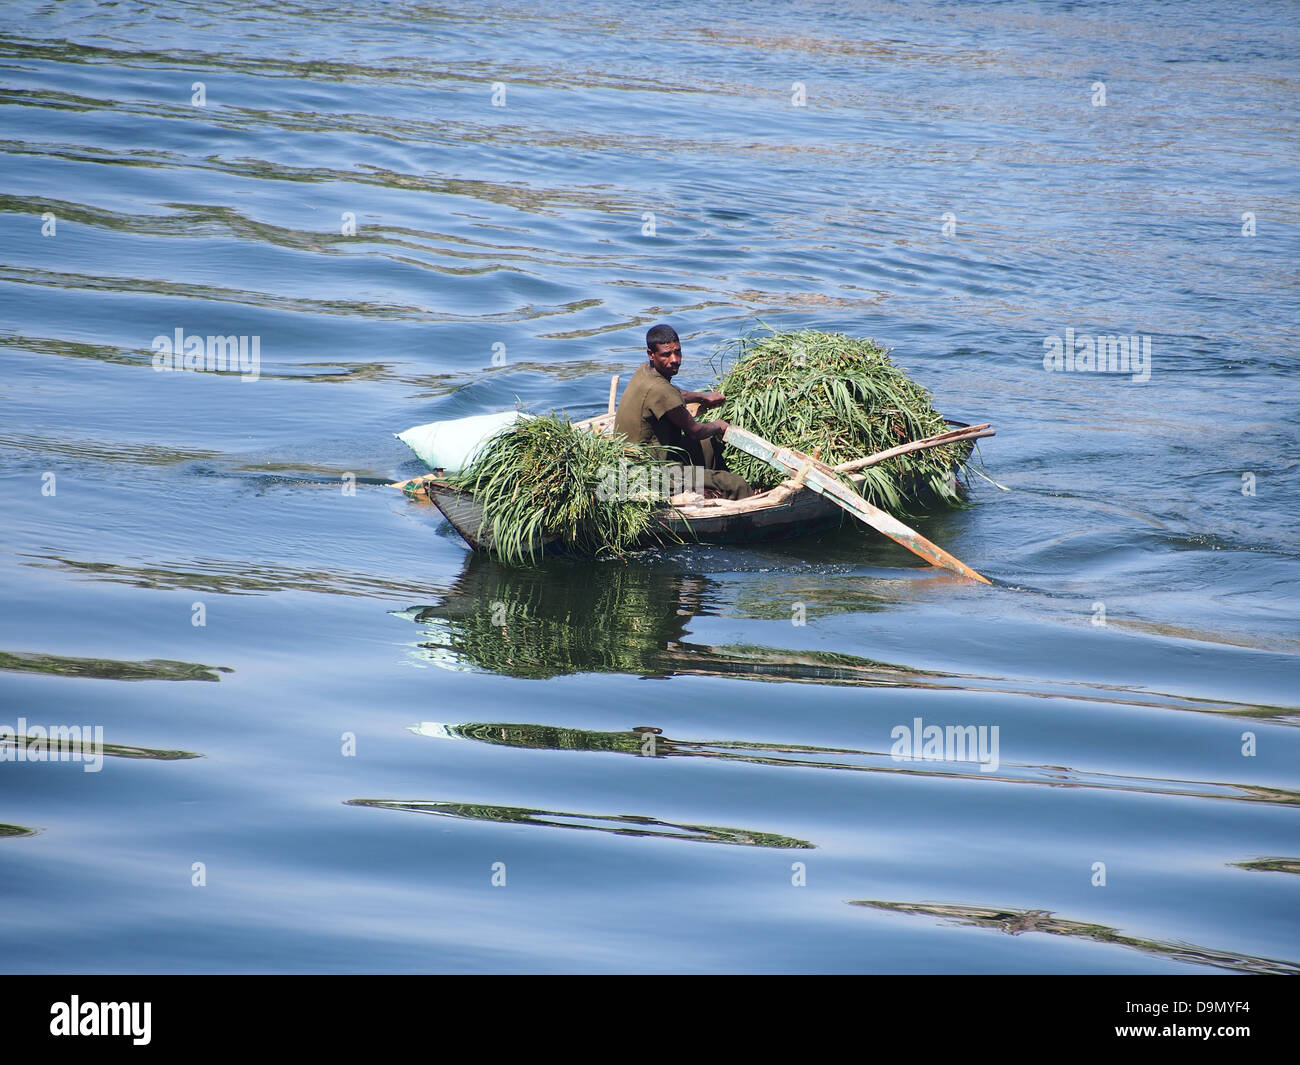 A man in a rowing boat laden with reeds on the River Nile, Egypt Stock Photo